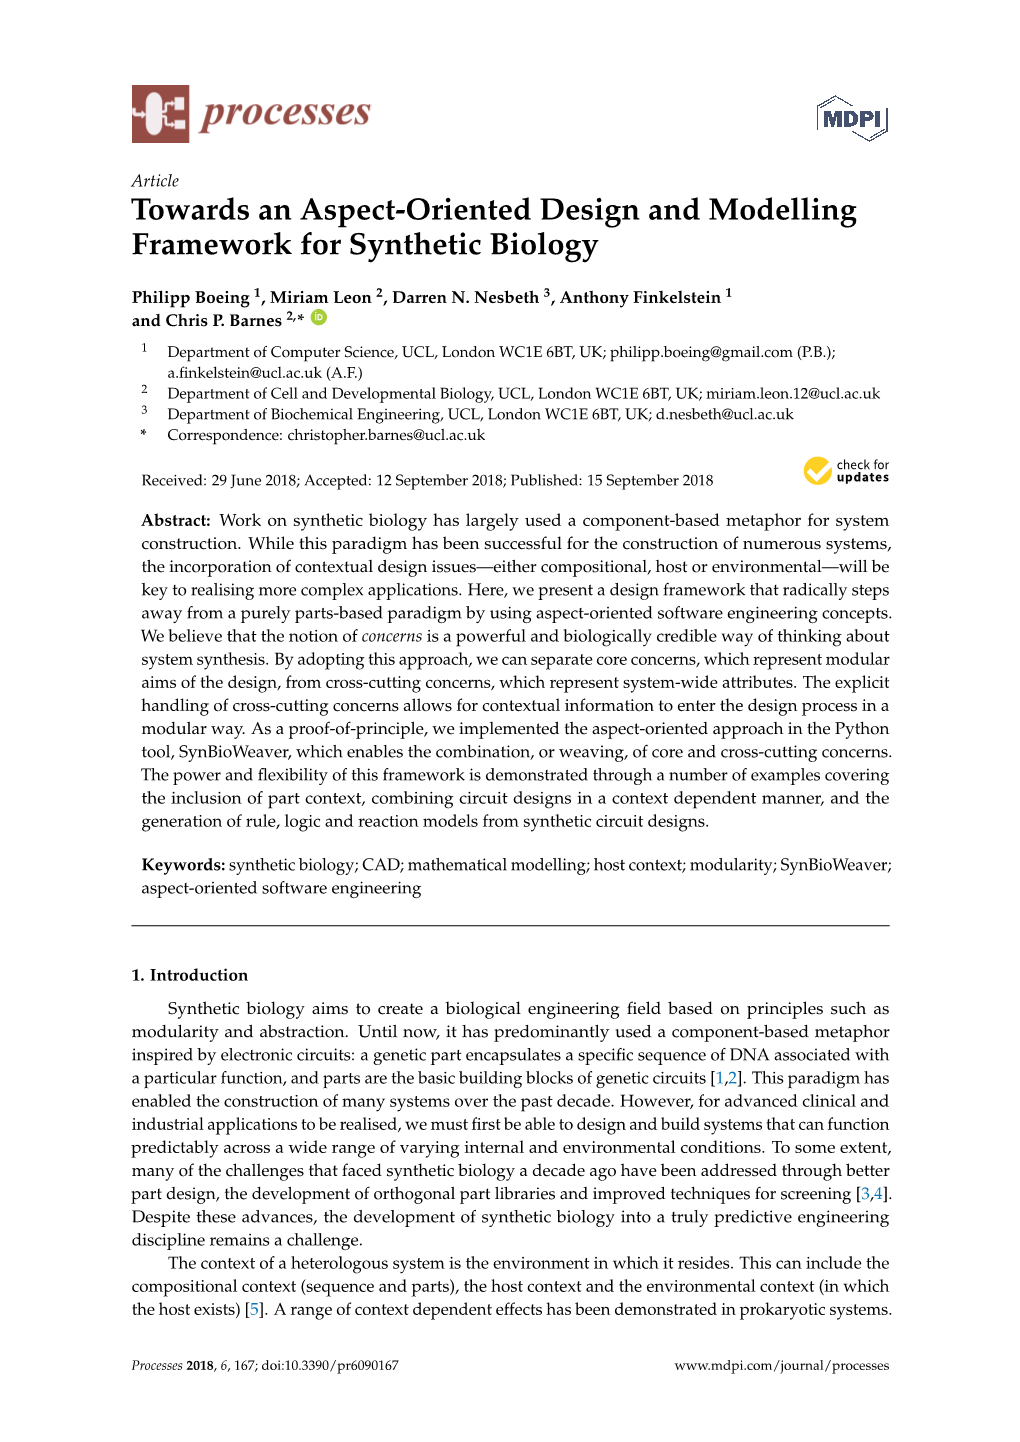 Towards an Aspect-Oriented Design and Modelling Framework for Synthetic Biology